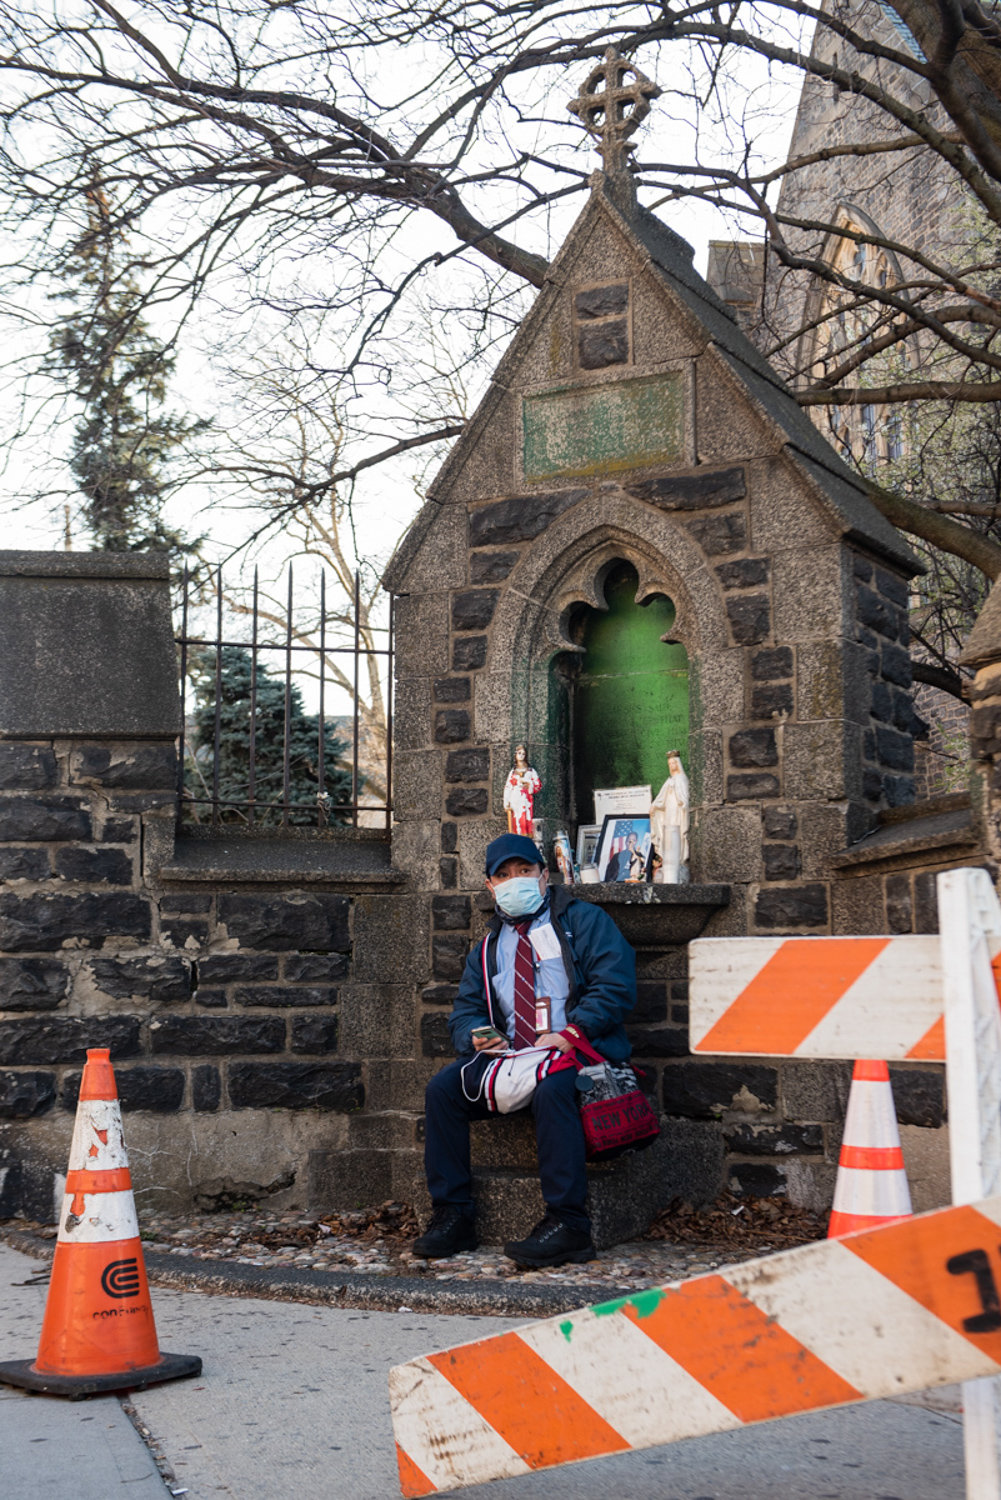 Frida Sterenberg photographed an MTA worker sitting on a stoop outside the Episcopal Church of the Mediator during a walk around the neighborhood, which is part of an ongoing project about how the area has changed as a result of the state’s shutdown in response to the coronavirus pandemic